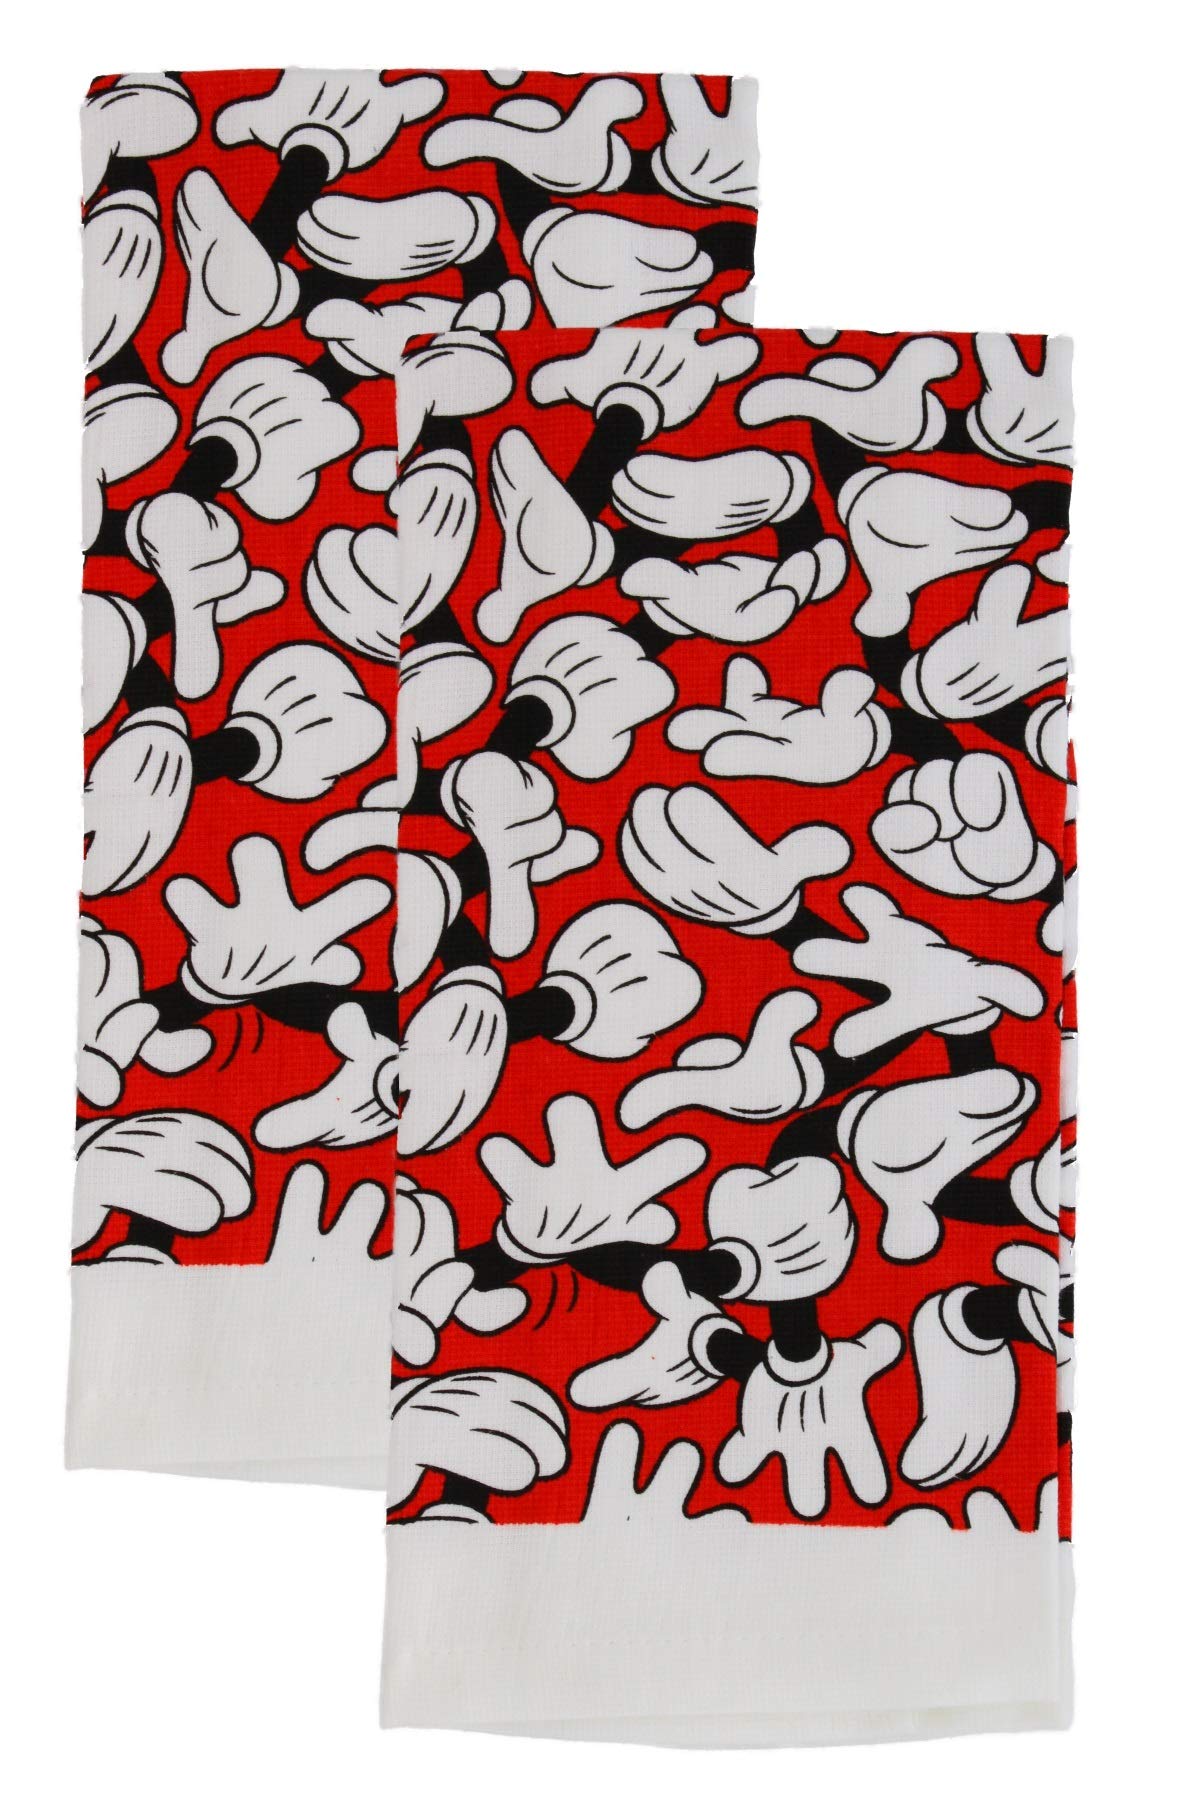 Disney 100% Cotton Kitchen Towels, 2pk, Perfect for Drying Dishes & Hands, Absorbent, Light Weight, and Adorable